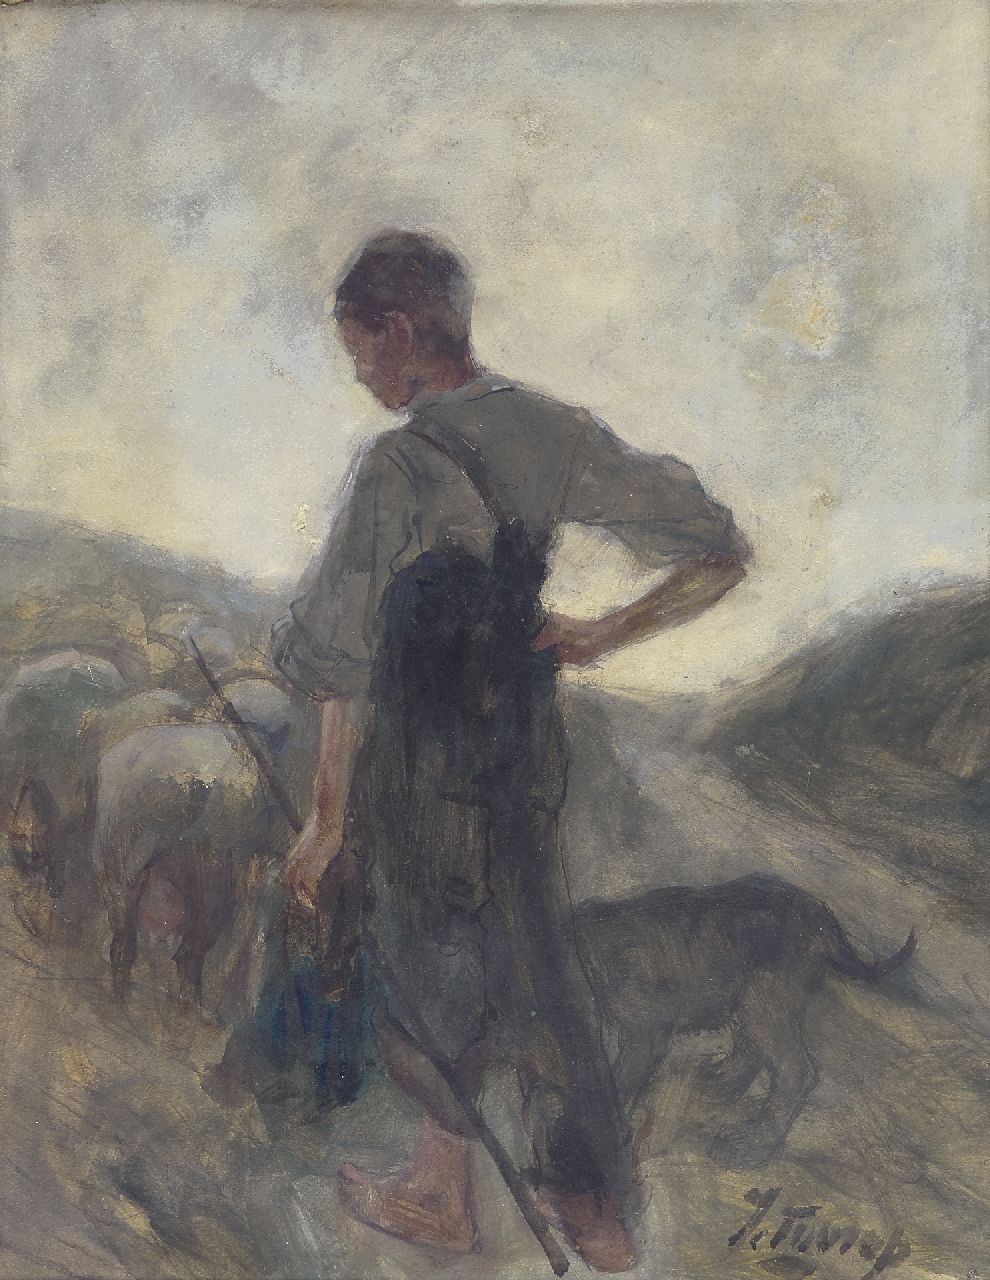 Toorop J.Th.  | Johannes Theodorus 'Jan' Toorop, Shepherd and his flock, watercolour on paper 40.4 x 31.1 cm, signed l.r. and painted ca. 1884